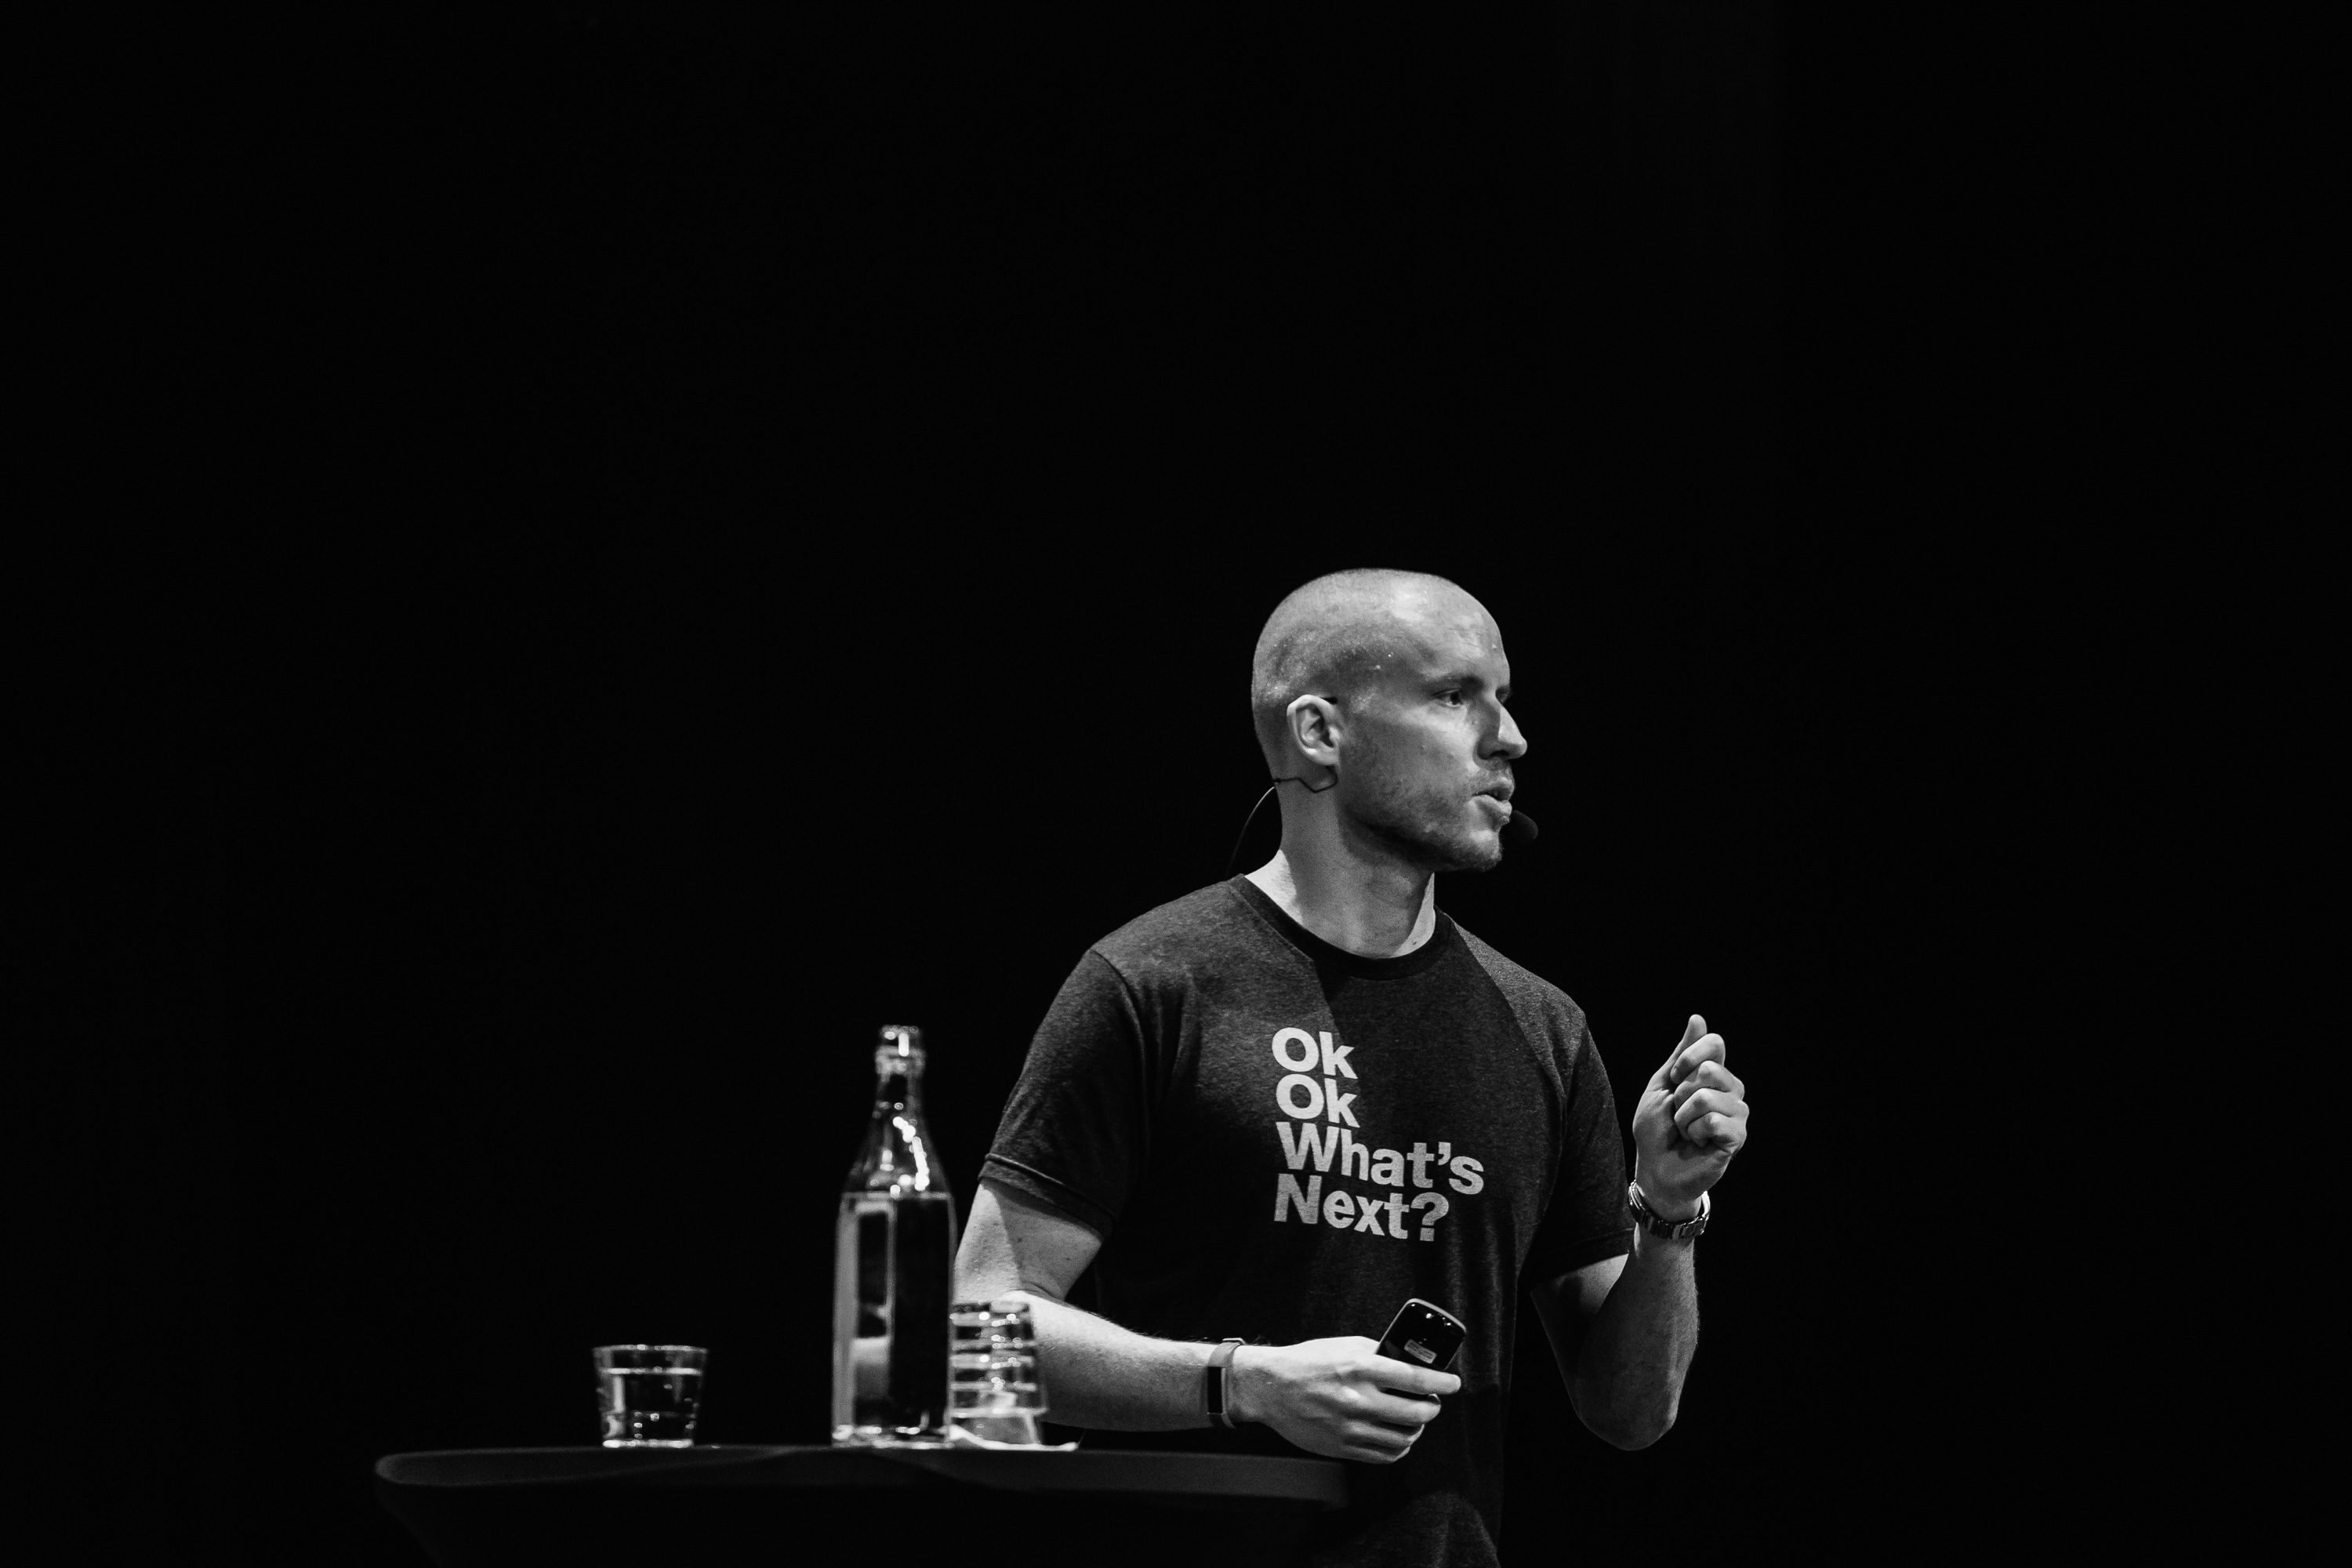 Noel Tock, Chief Growth Officer, at Human Made speaking on stage at WCEU 2018